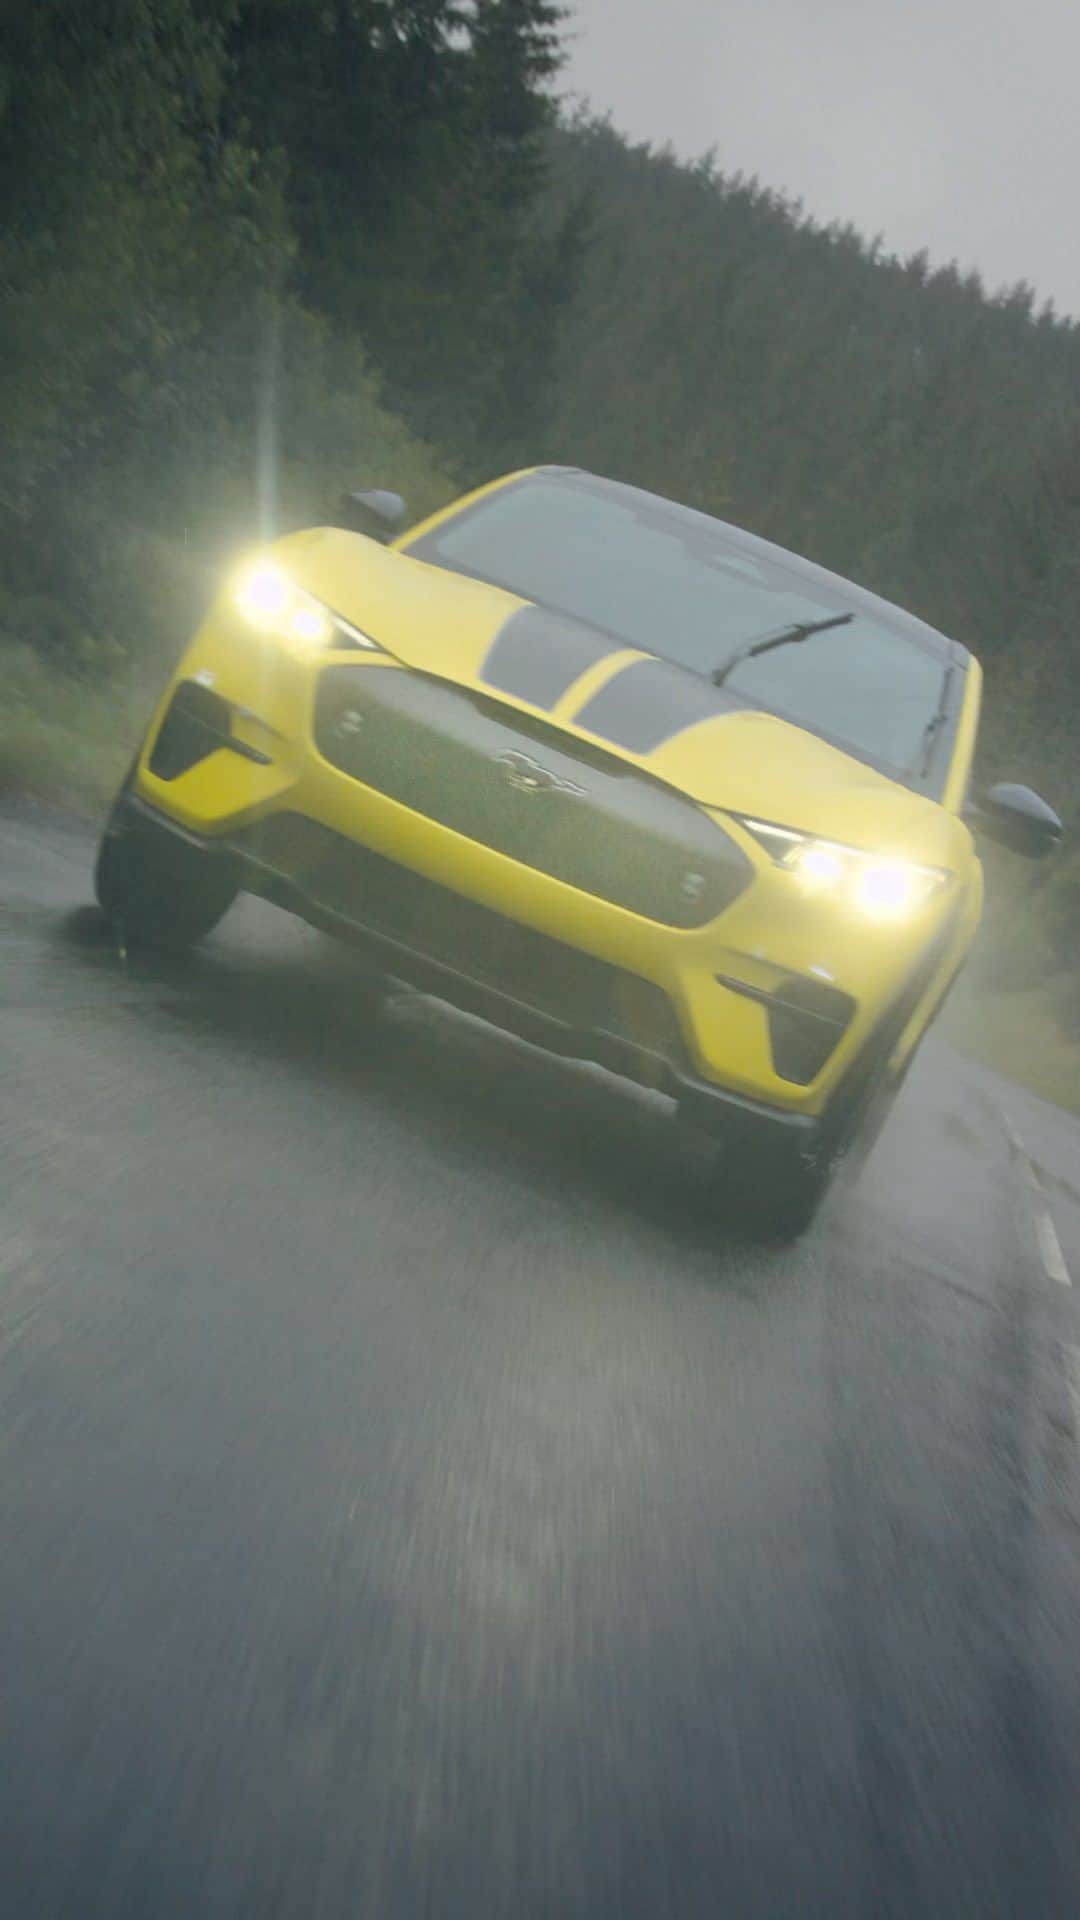 Fordのインスタグラム：「A Ford MustangⓇ designed to go where the rubber meets the dirt road. Meet the new all-electric Ford Mustang Mach-EⓇ Rally. Find out more at our link in bio. #MustangMachE   Disclaimer: Prototype shown with available Ford accessories. Closed course. Do not attempt. Always consult the owner’s manual before off-road driving, know your terrain and trail difficulty, and use appropriate safety gear. Vehicle available early 2024.」